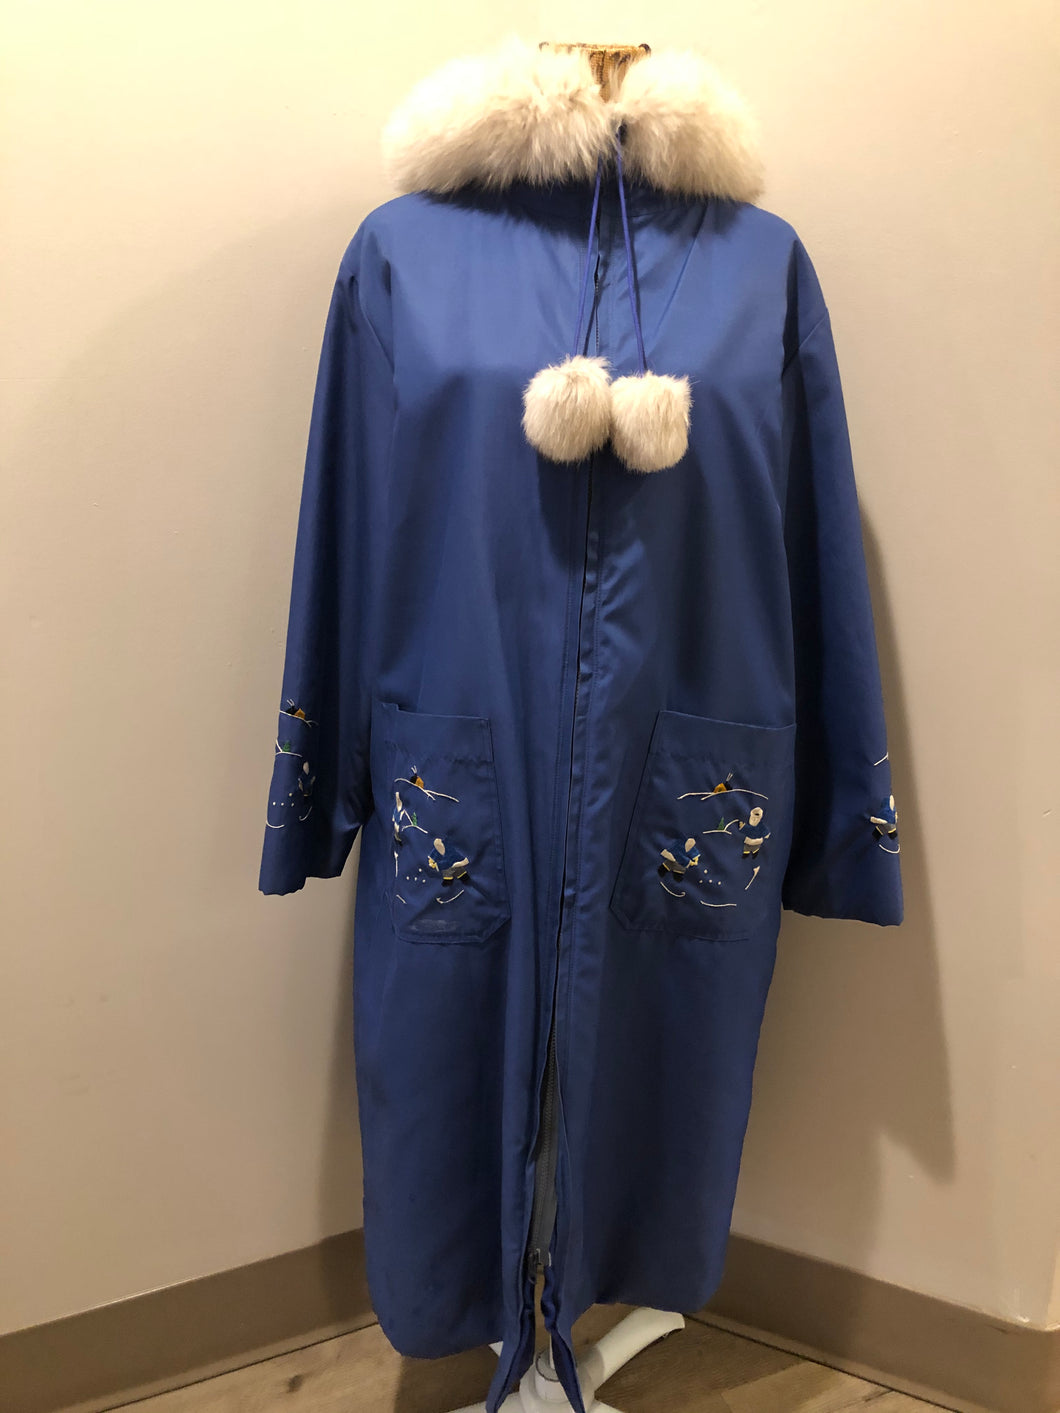 Kingspier Vintage - Blue northern parka made by Marilyn Bessey with wool blend lining, hood with white fur trim, fur Pom poms, zipper closure, patch pockets, arctic life design embroidered on the front pockets and the sleeves. Made in Canada.